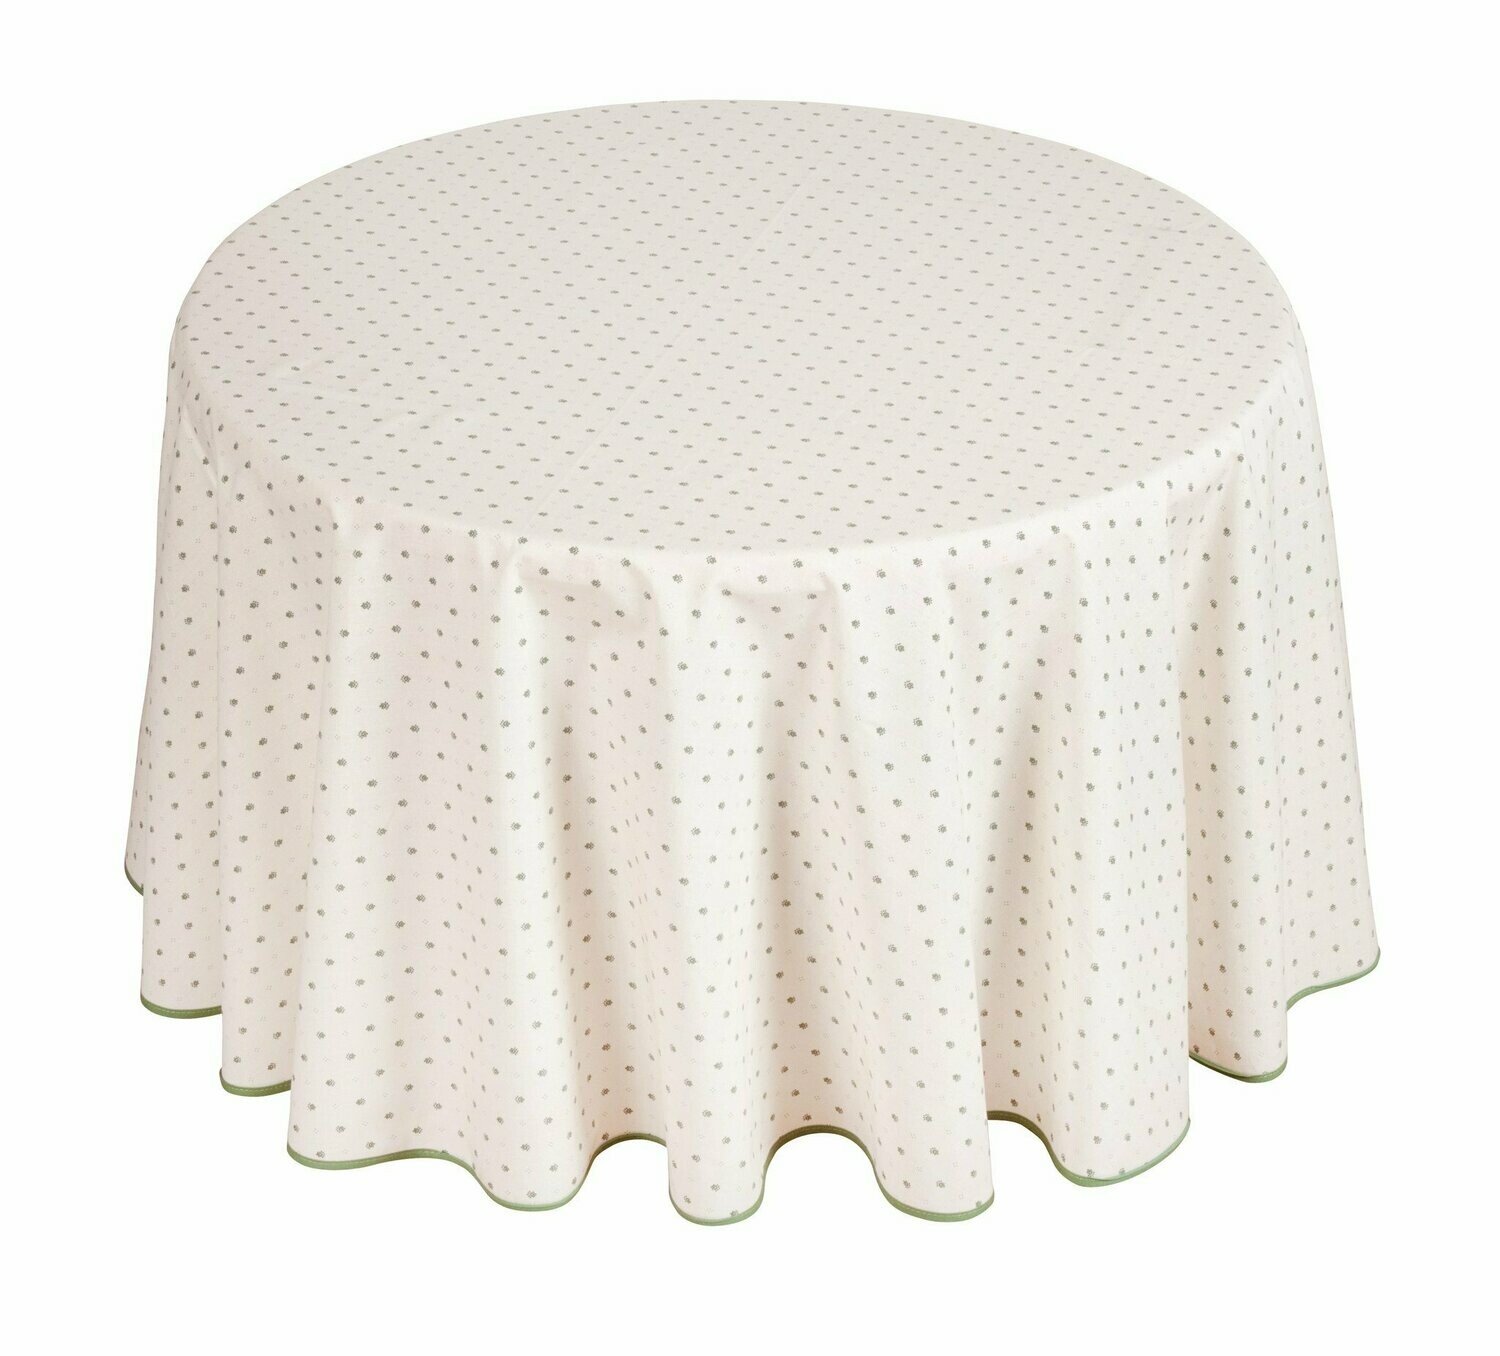 FRENCH LINEN - CALISSONS ROUND COTTON TABLECLOTH 168CM DIAMETER